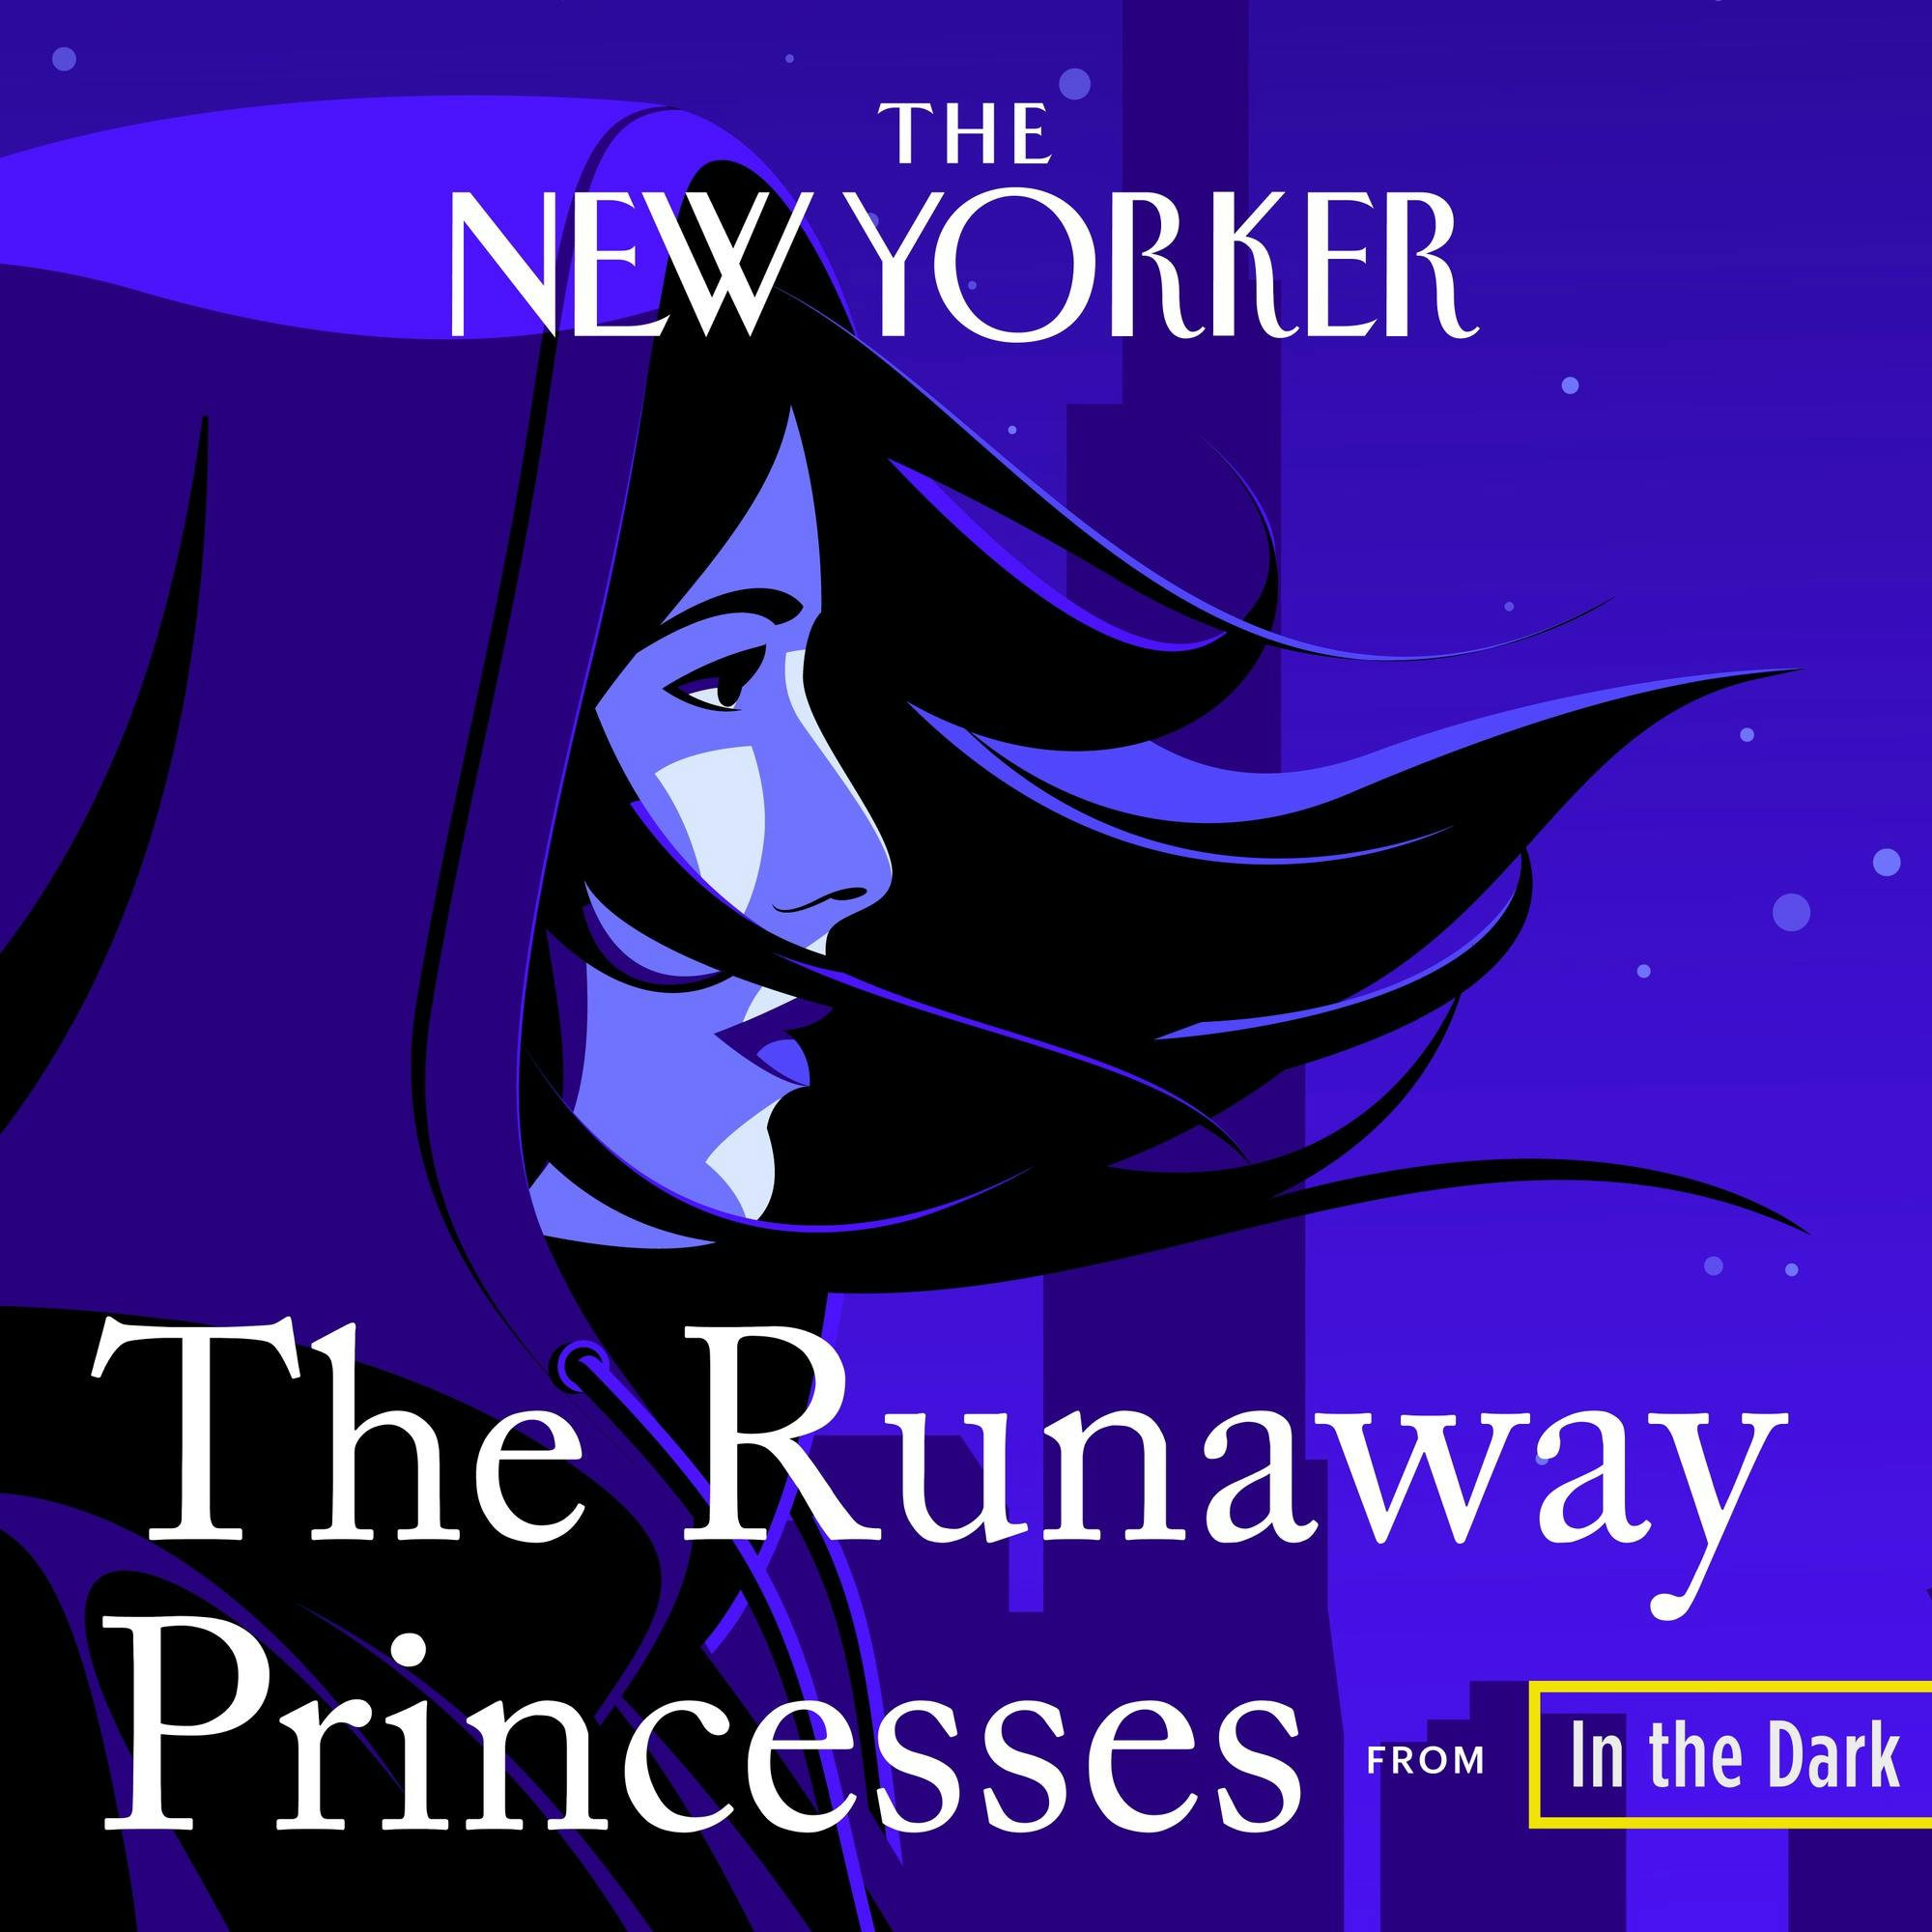 Introducing The Runaway Princesses from In The Dark and The New Yorker